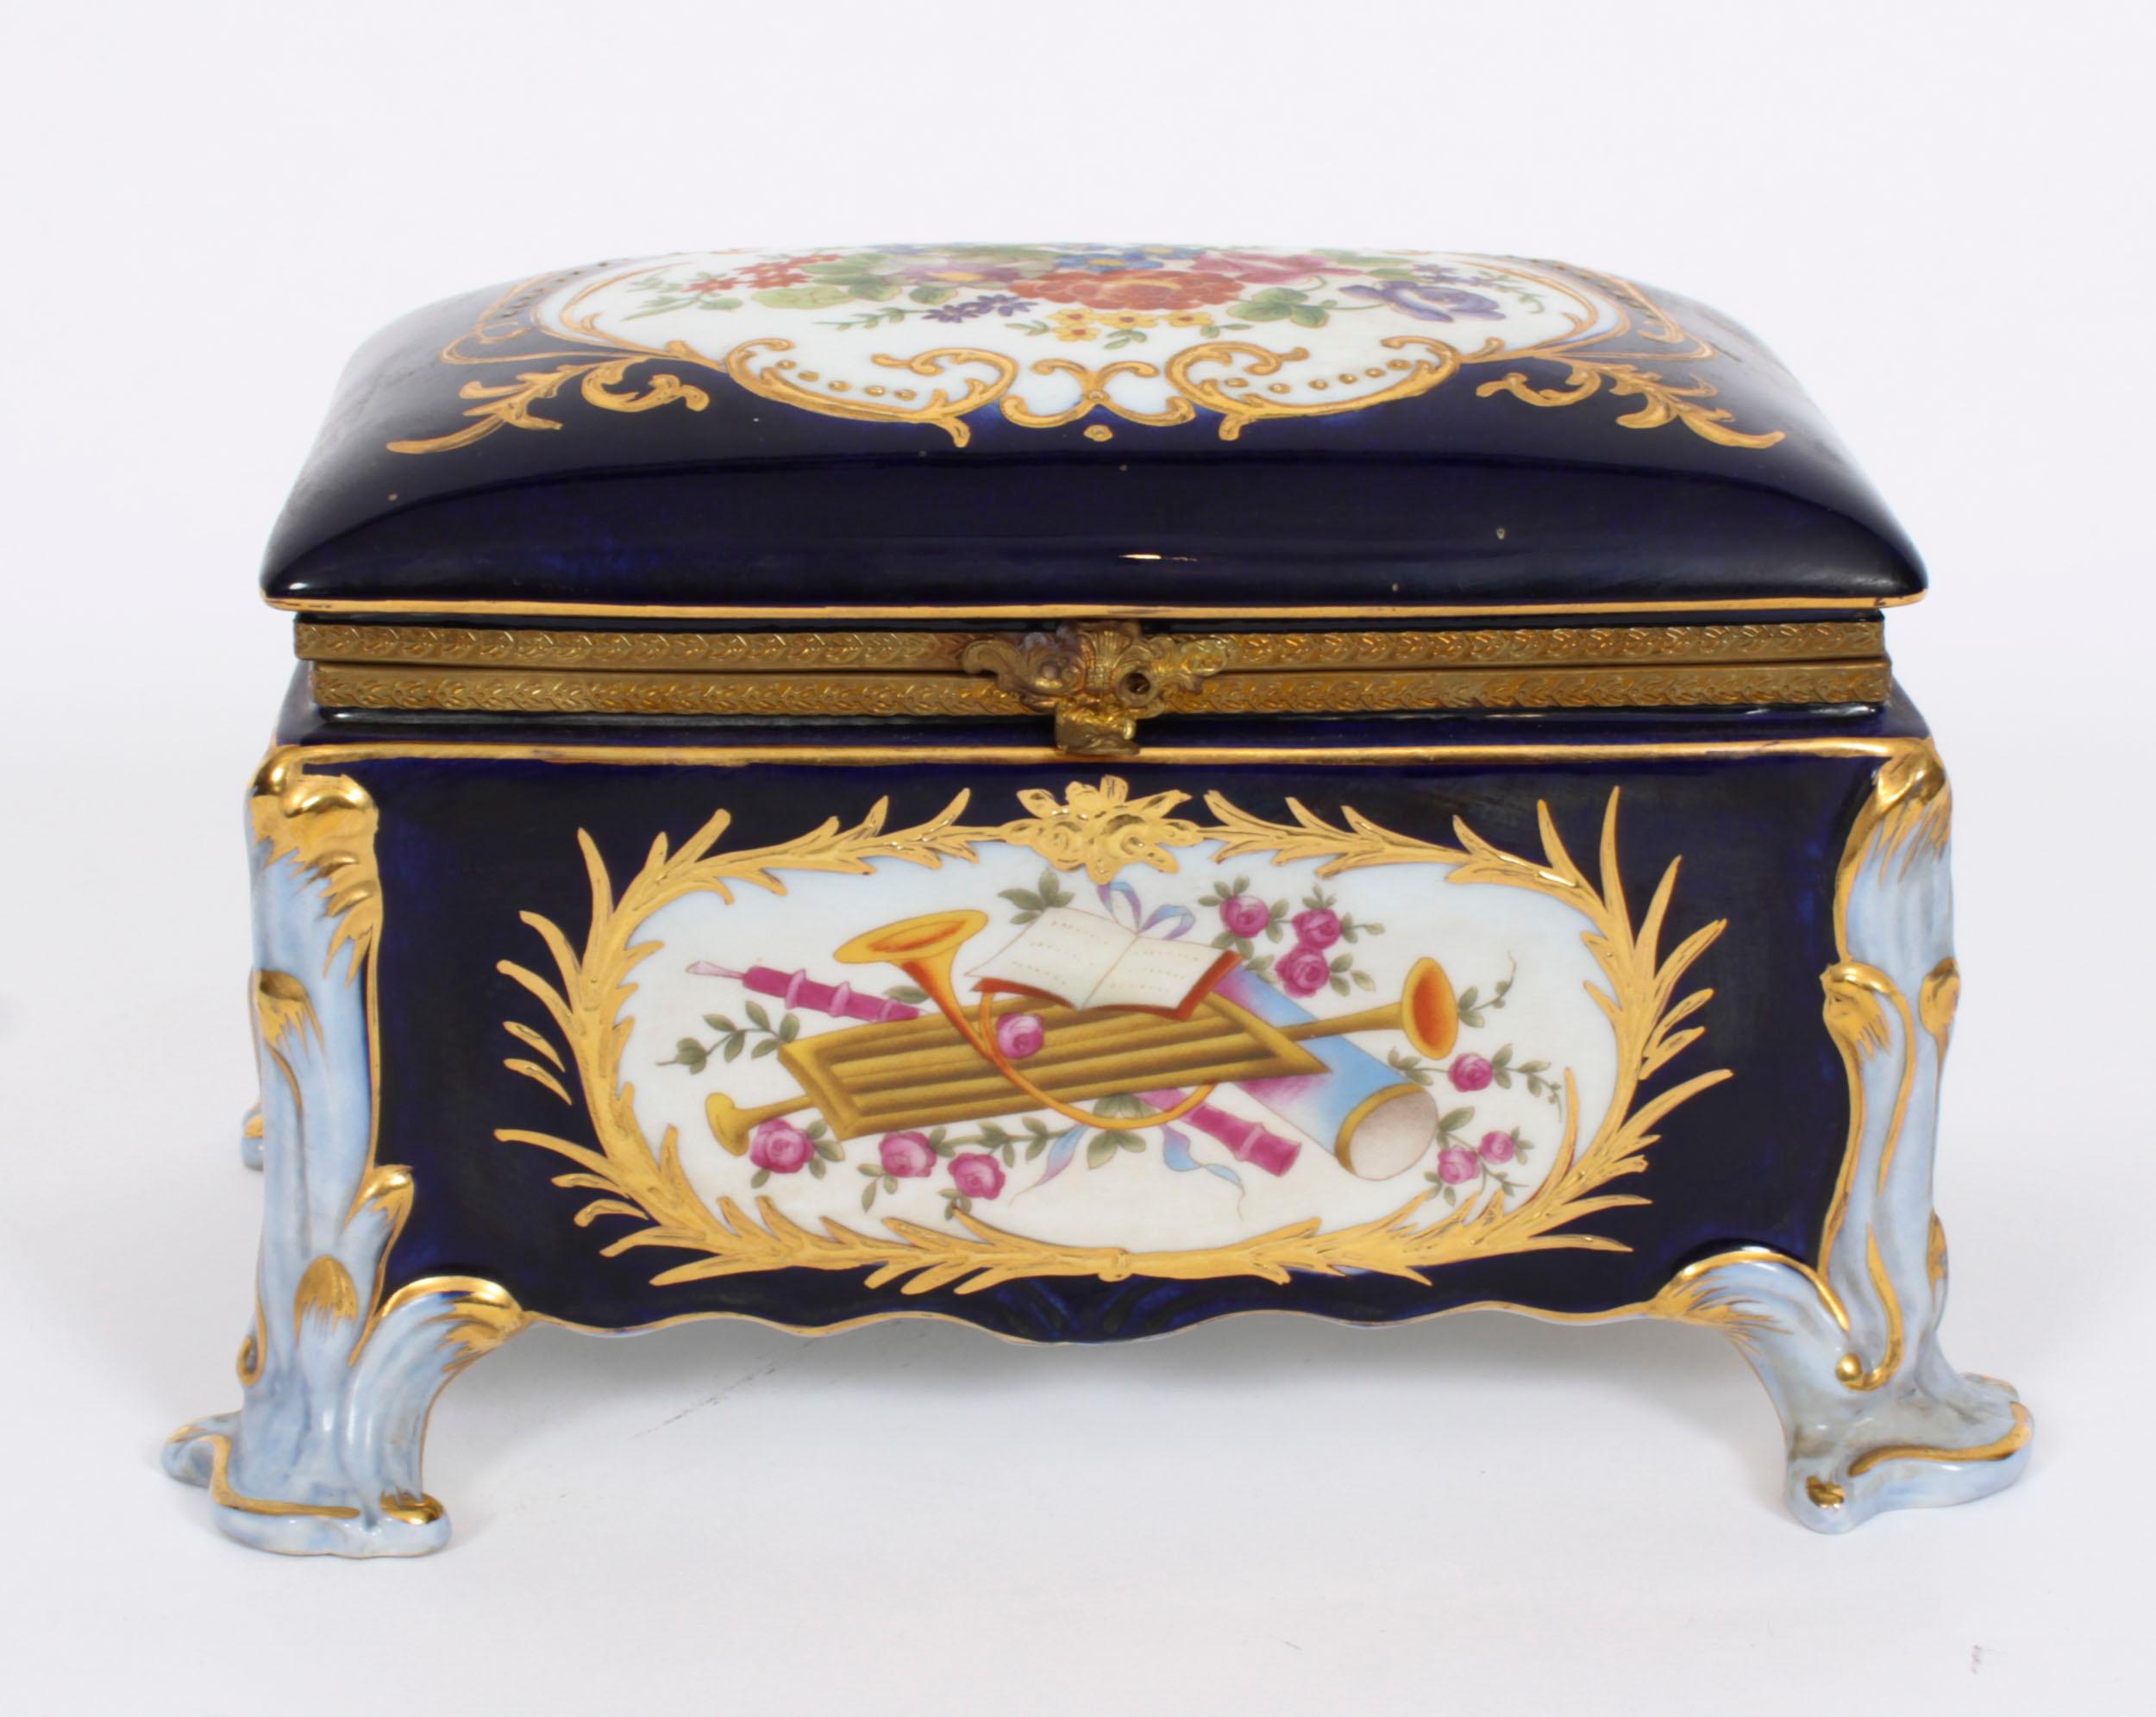 A stunning vintage porcelain and ormolu mounted jewellery casket in the Imperial Russian manner, dating from the last quarter of the 20th century.

This beautiful piece is hand-painted in a classic royal blue and is further adorned with musical